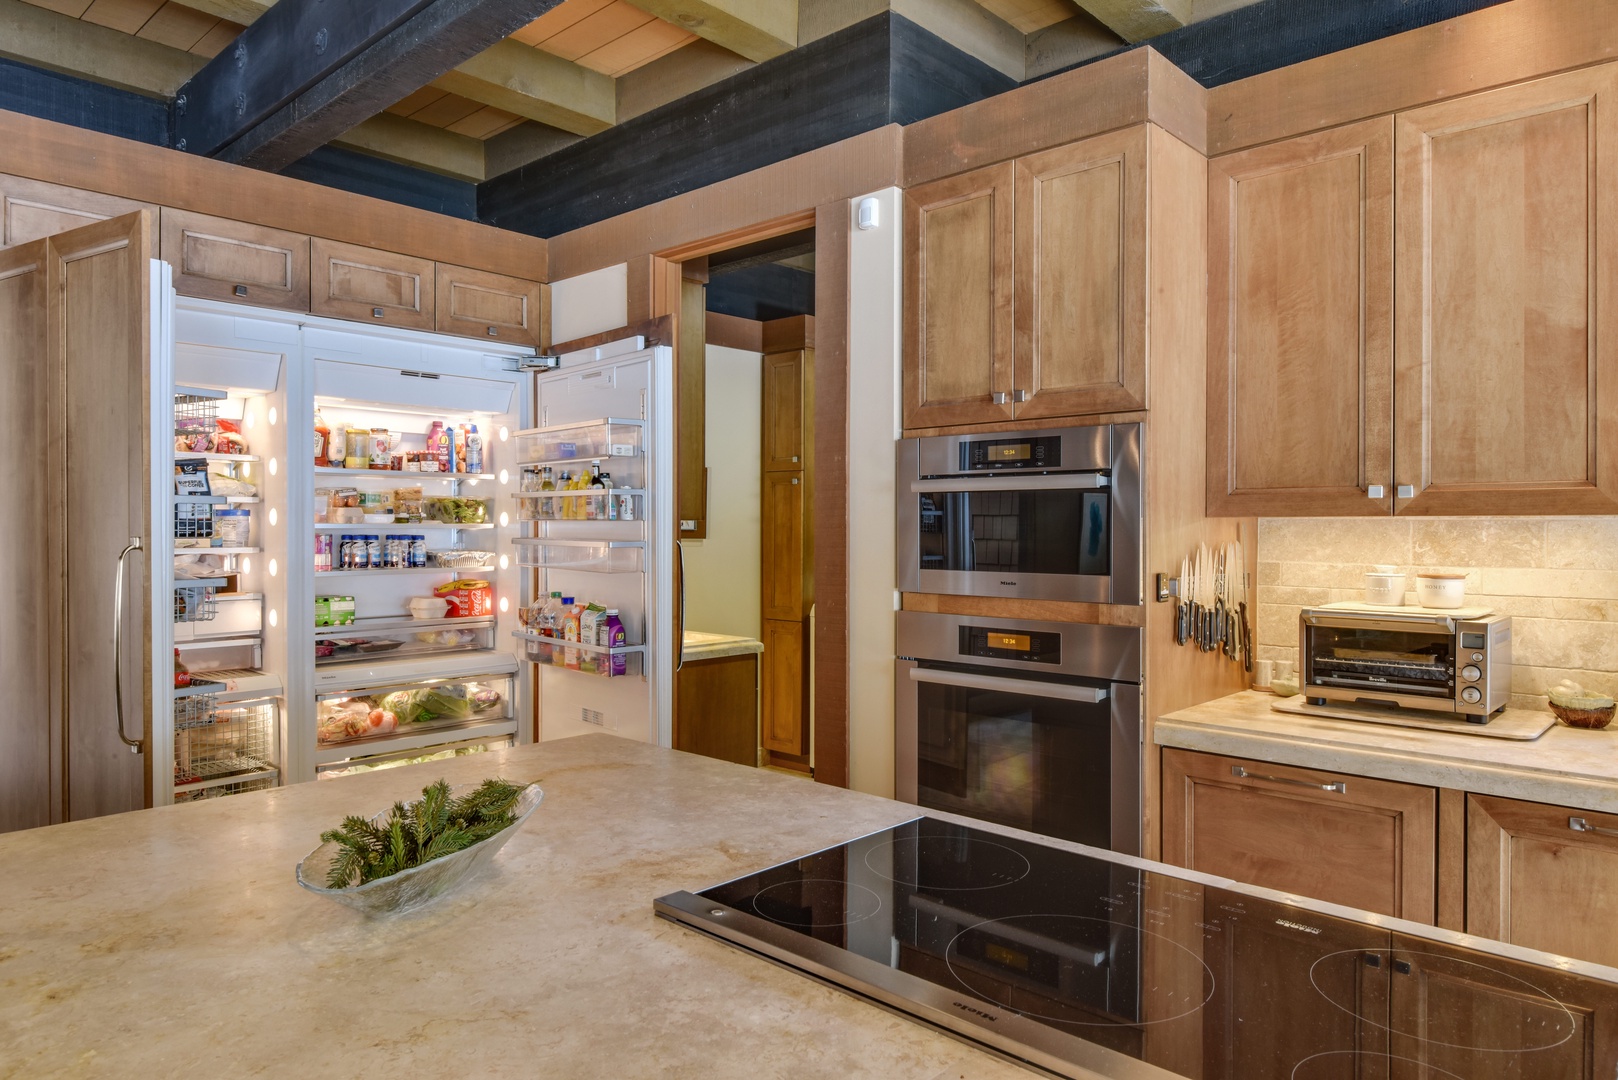 Treat yourself to culinary creations in the fully-equipped kitchen